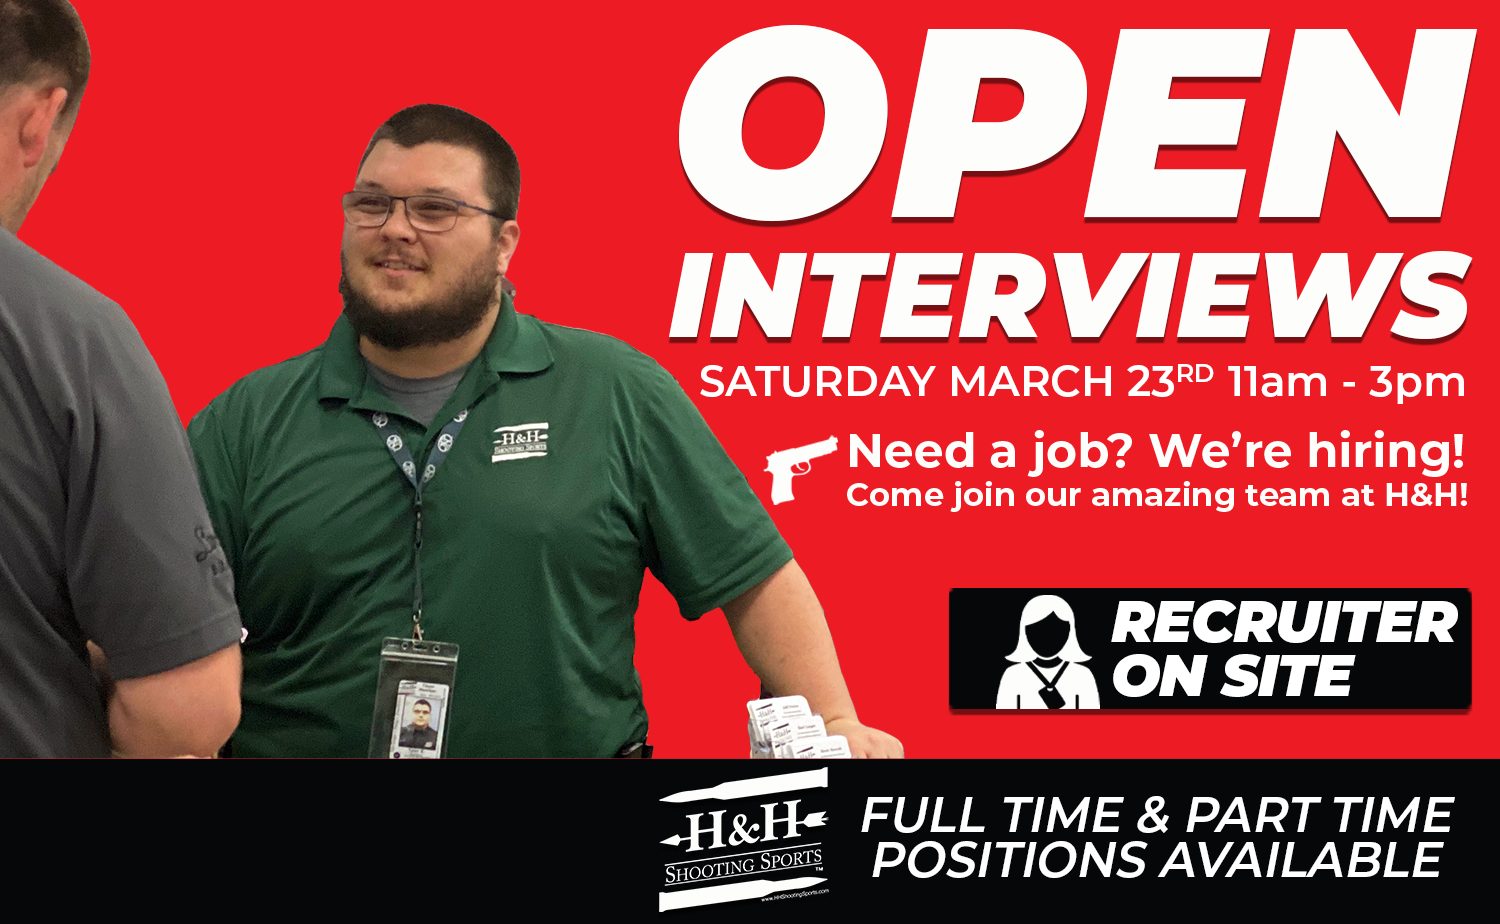 Open interviews for hiring at H&H Shooting Sports in Oklahoma